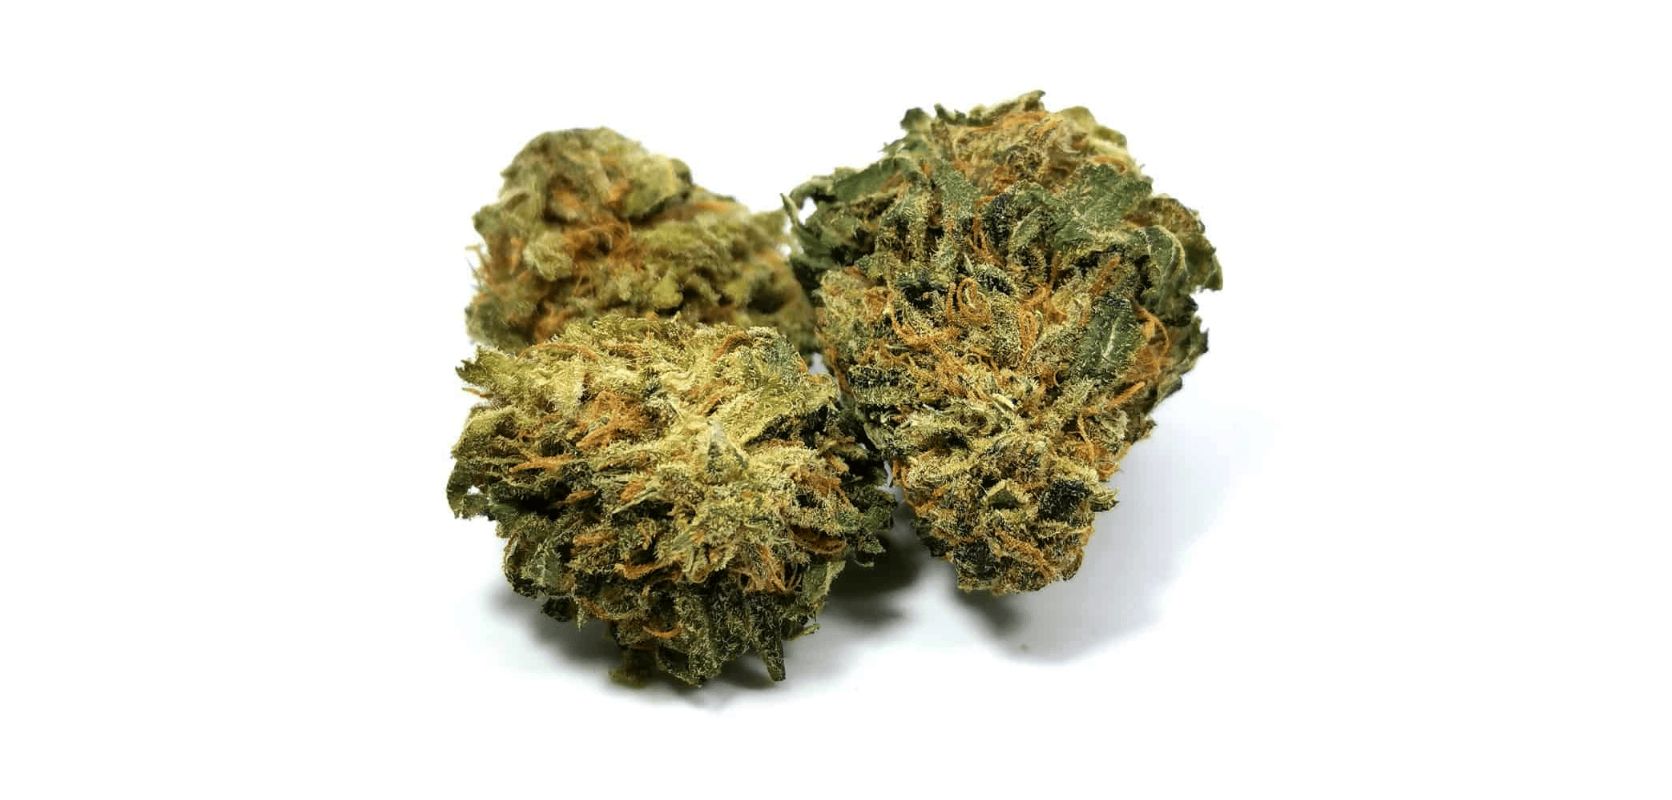 The Rockstar OG strain is a mellow bud - the THC content ranges between 14 to 19 percent, placing this Indica into the more "balanced" zone. 